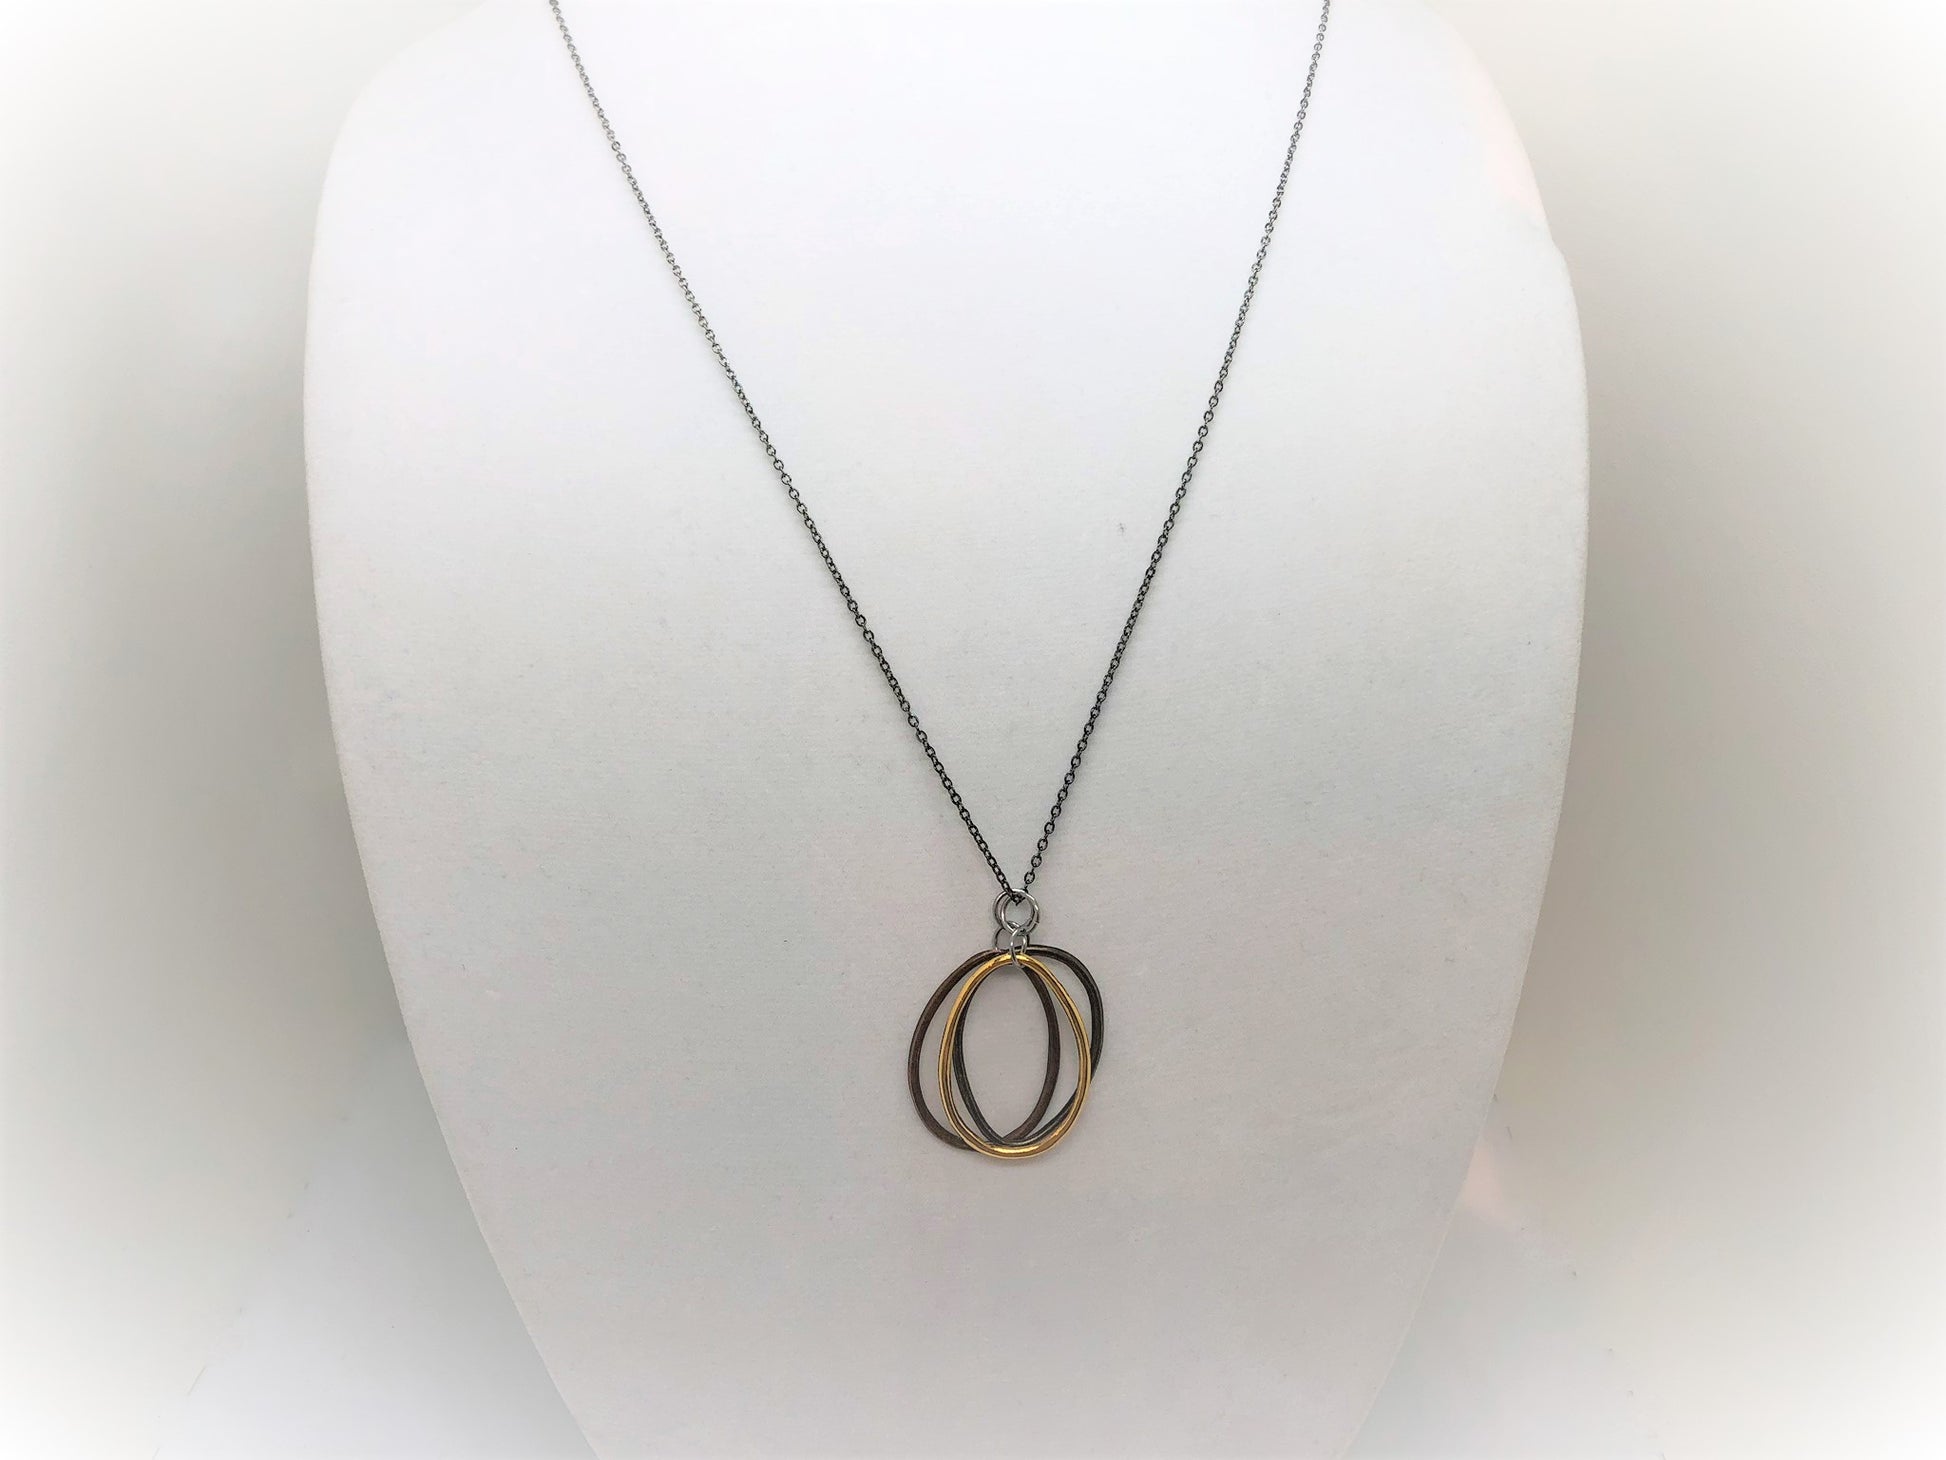 Three Ring Necklace - Emmis Jewelry, Necklace, [product_color]